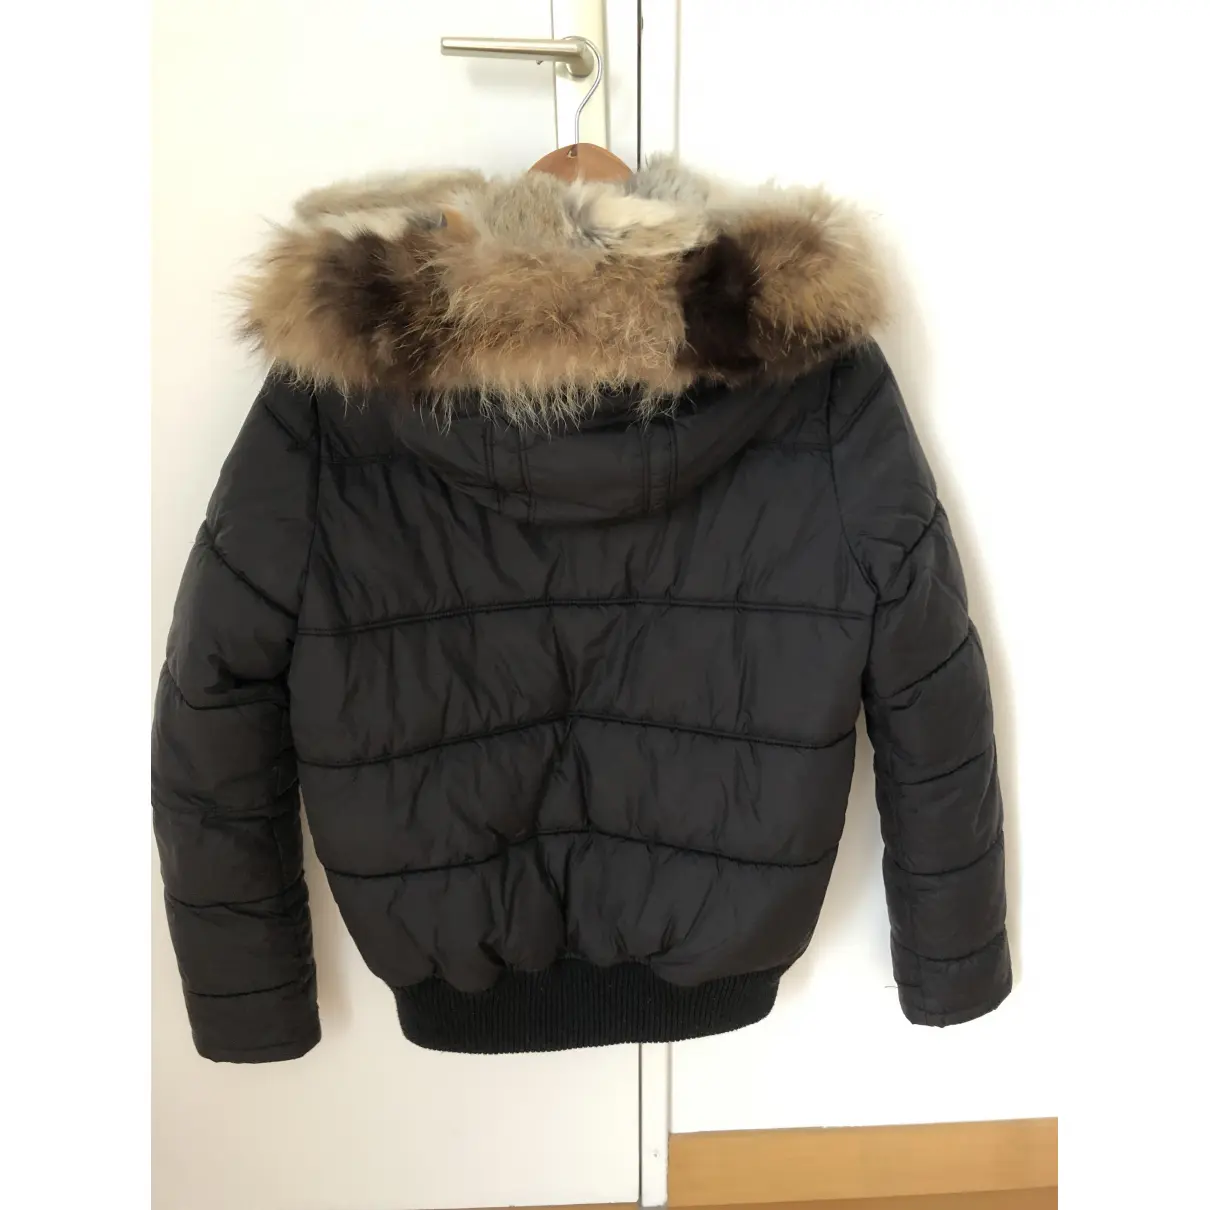 Buy SUD EXPRESS Puffer online